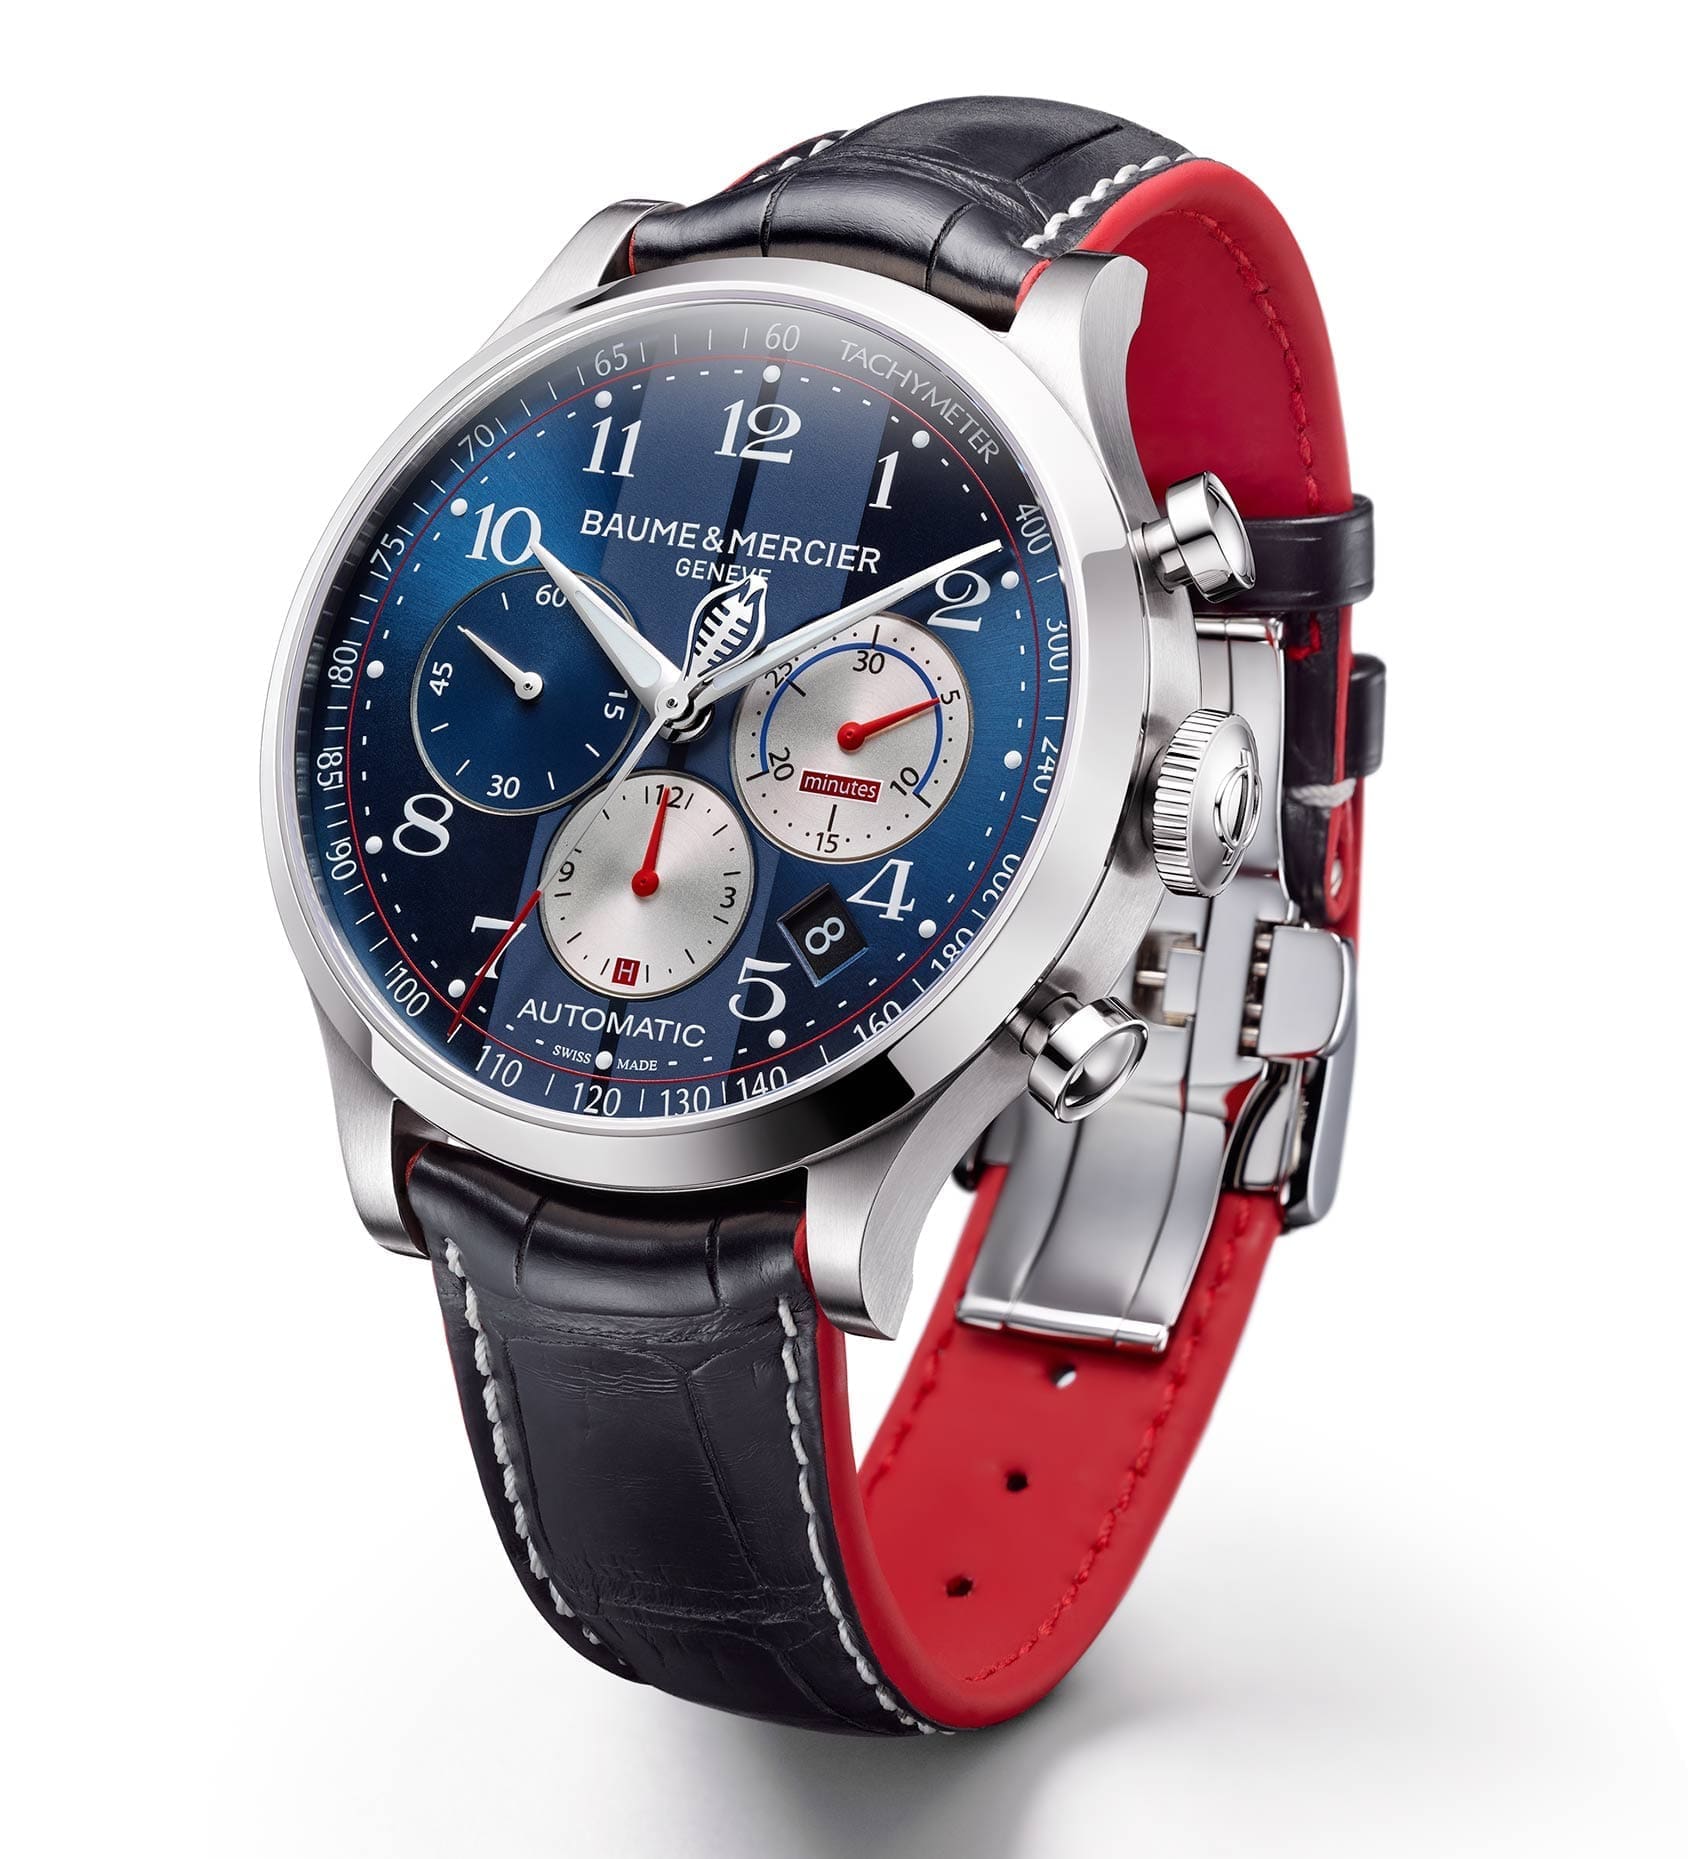 EDITOR’S PICK: The racy good looks of the Baume & Mercier Capeland Shelby Cobra